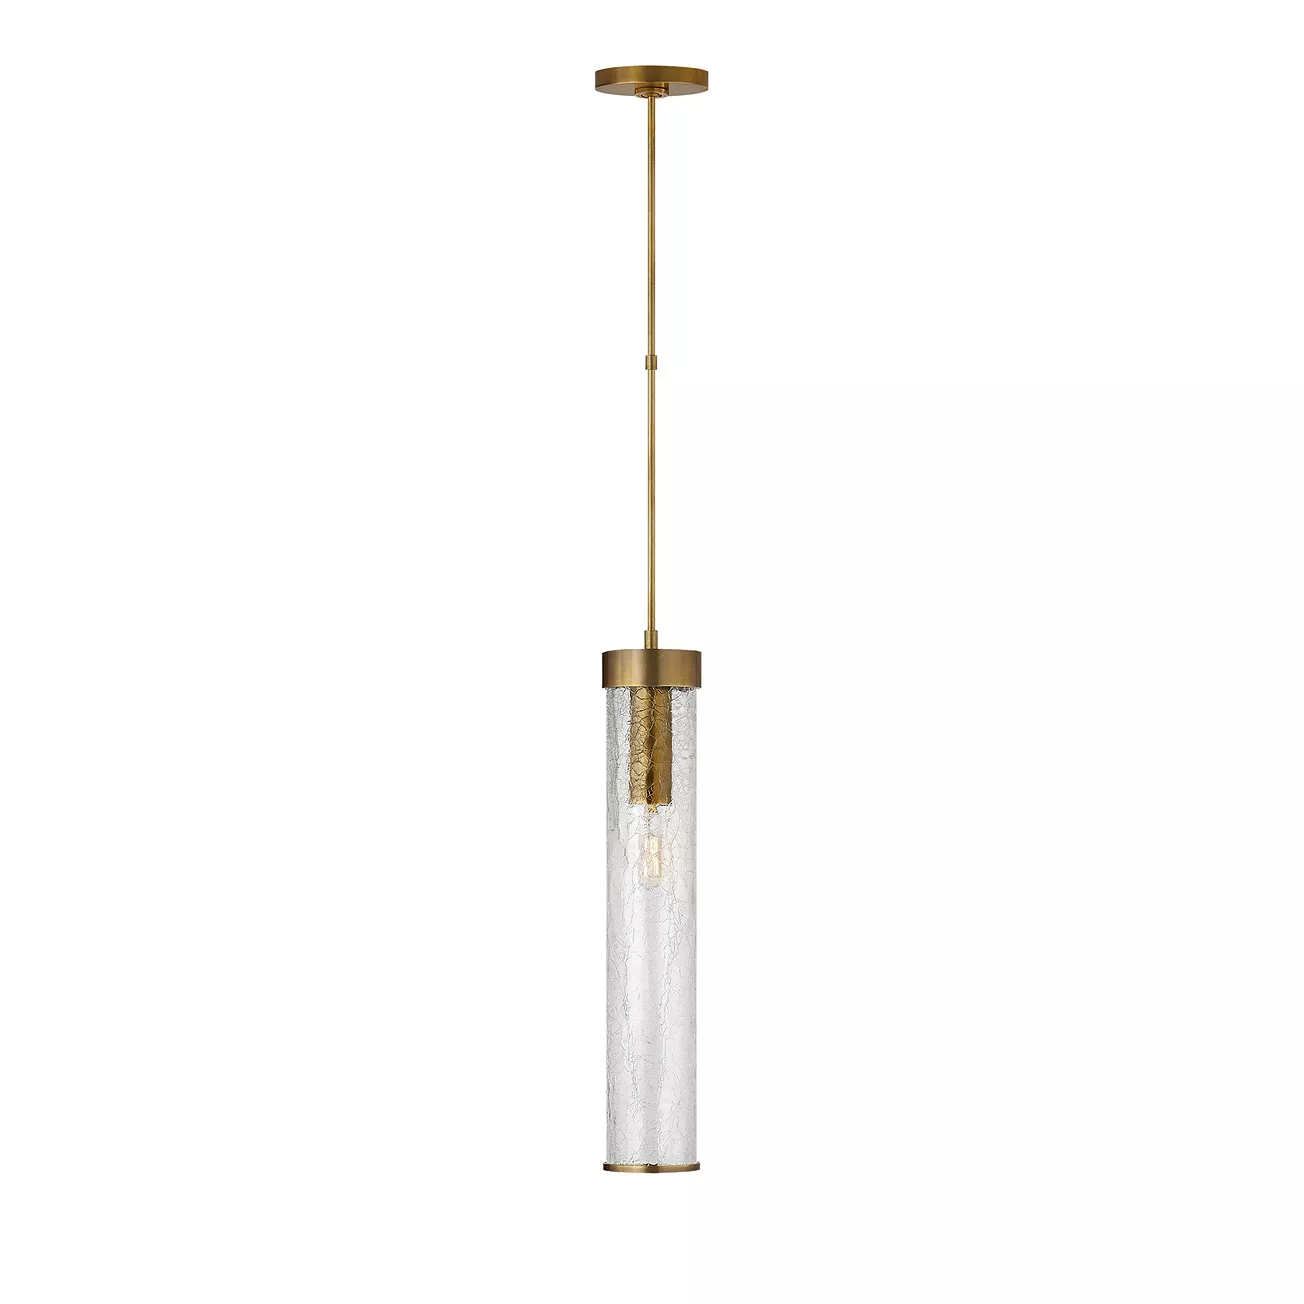 Kelly Wearstler Liaison Long Pendant with Crackle Glass